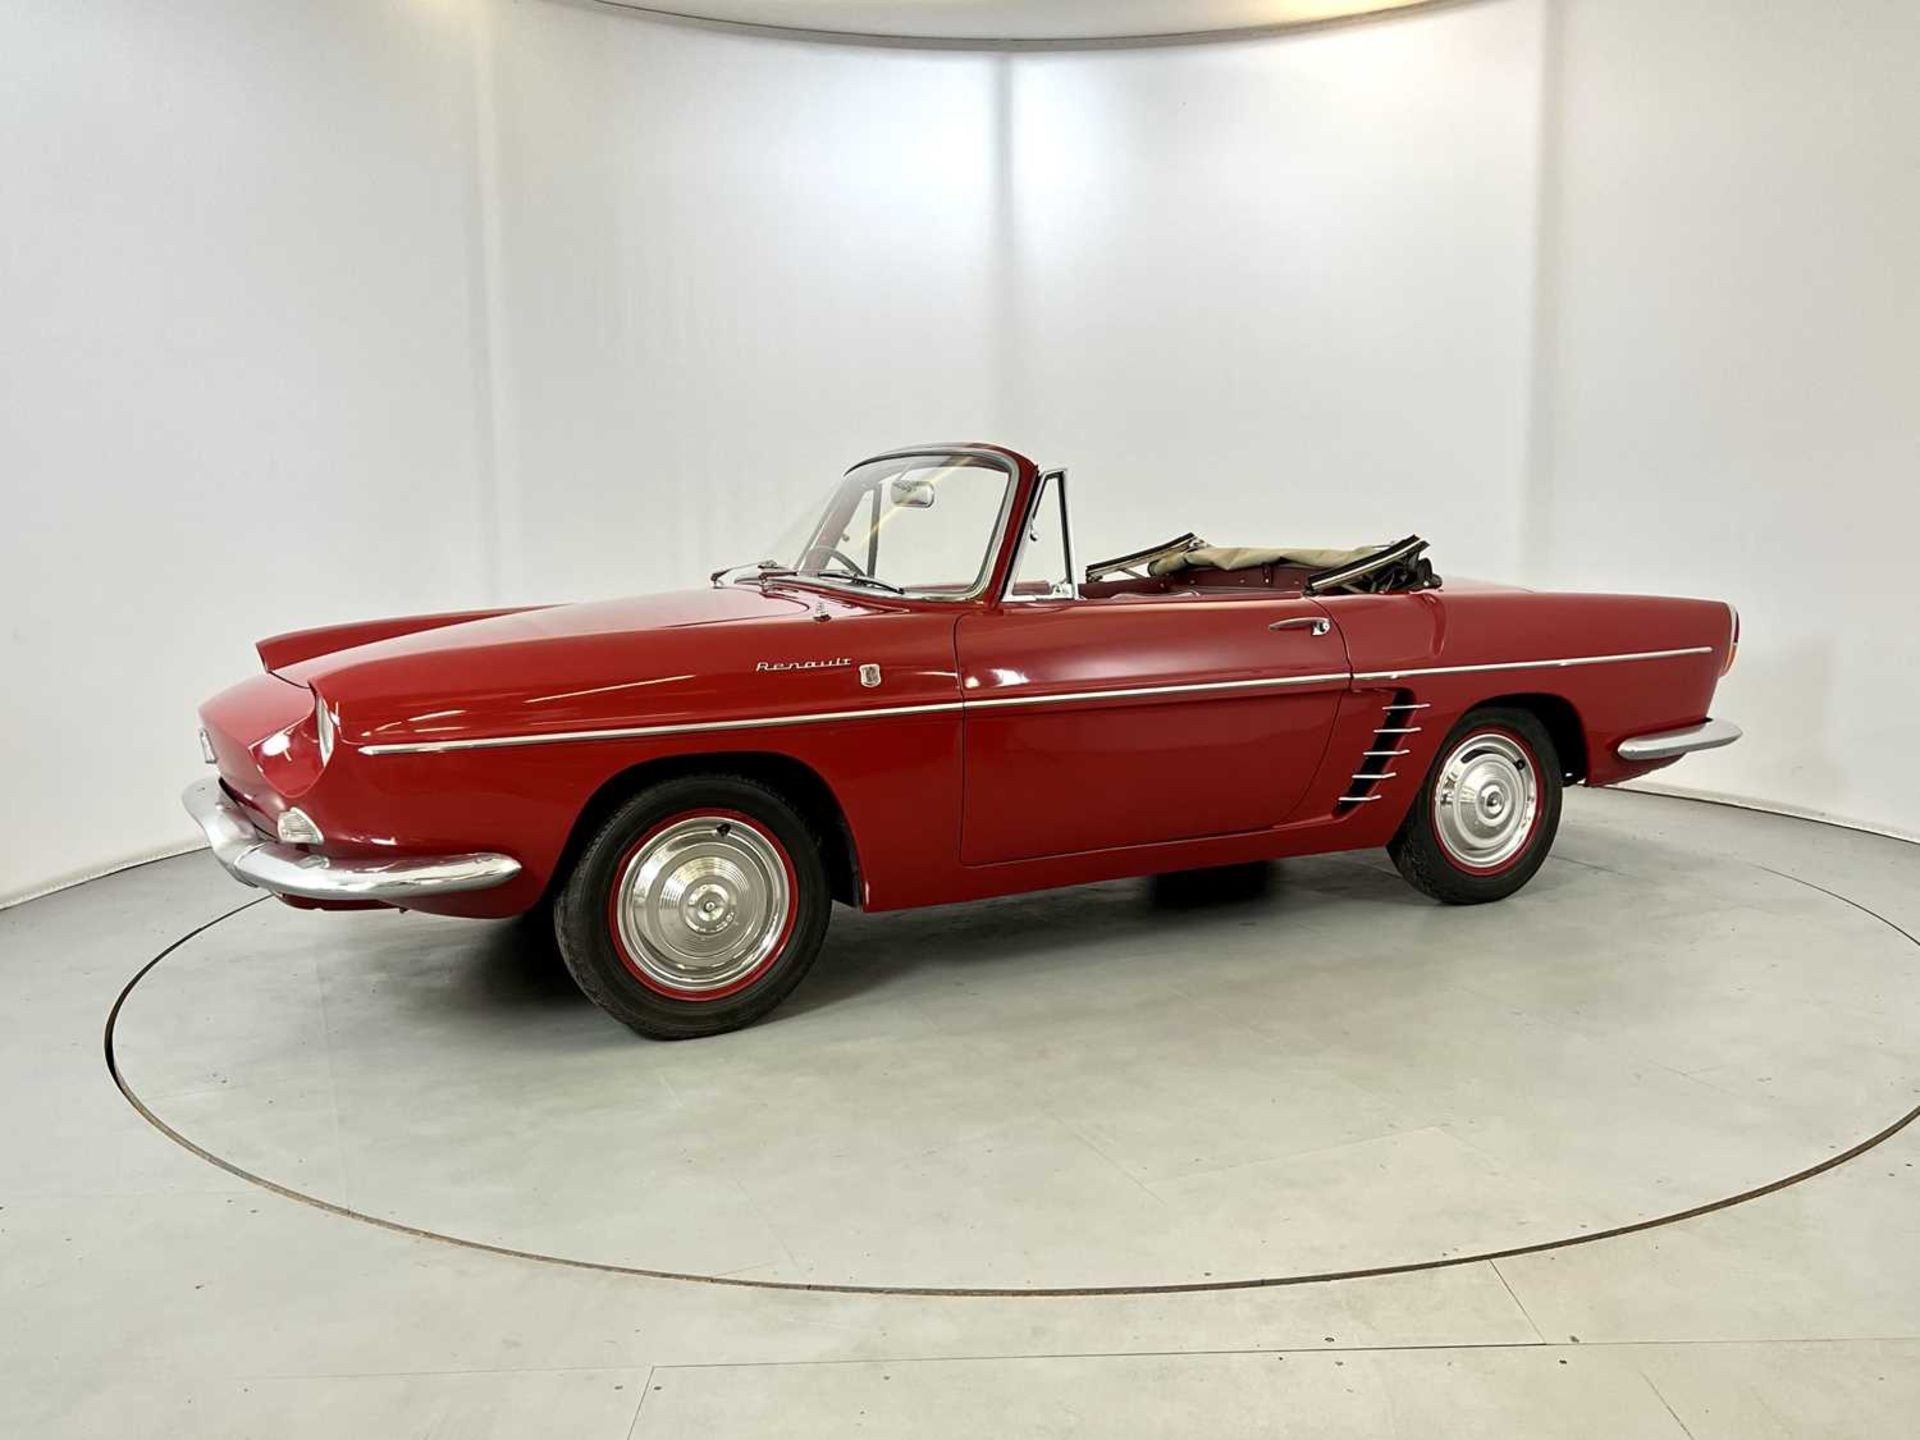 1962 Renault Floride Convertible - Image 17 of 43